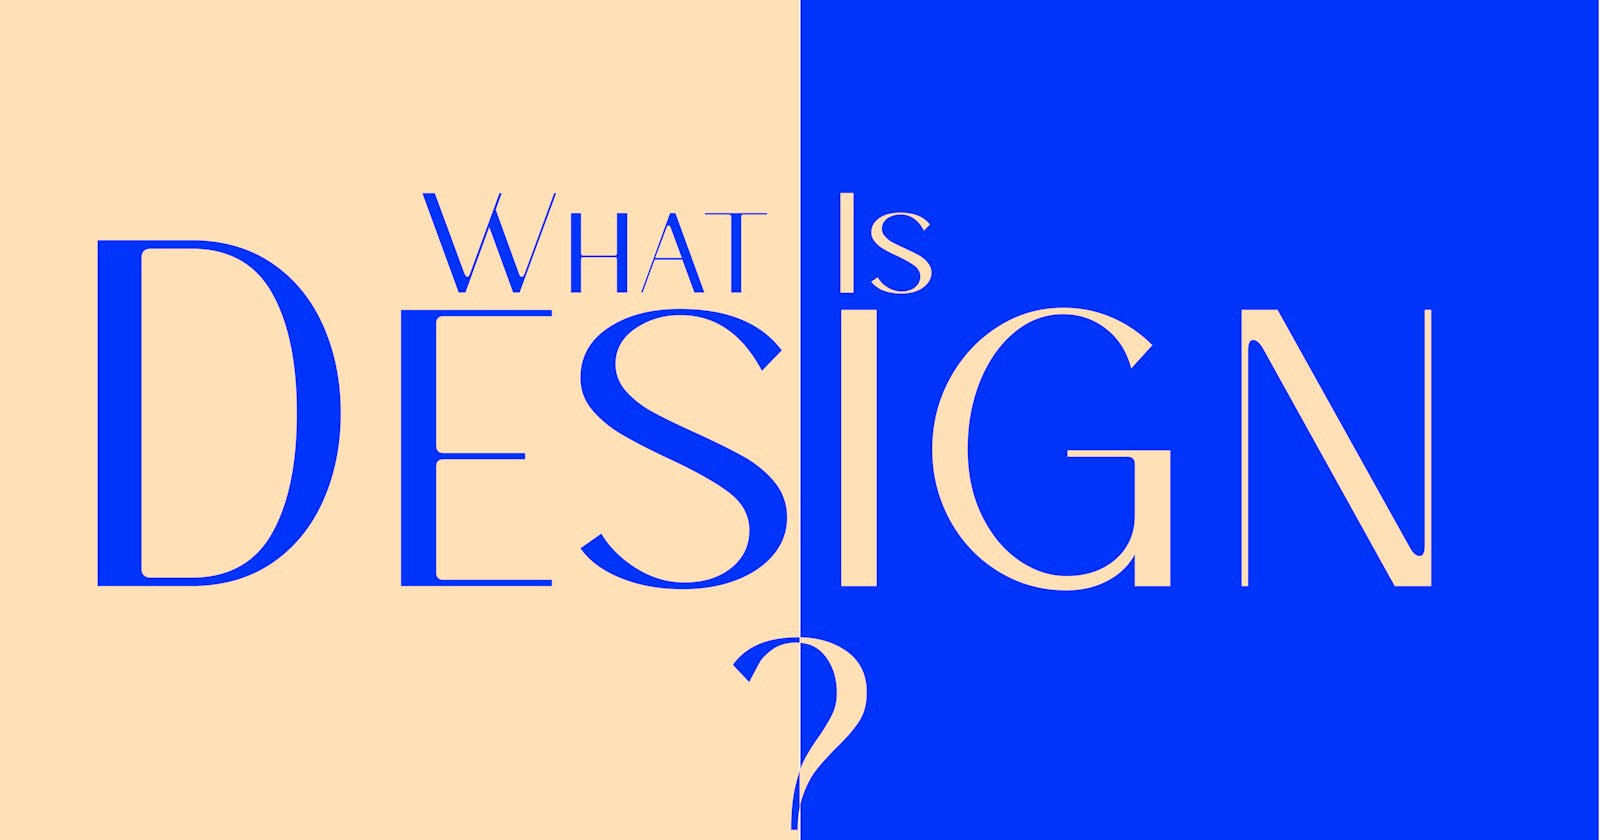 What is design?